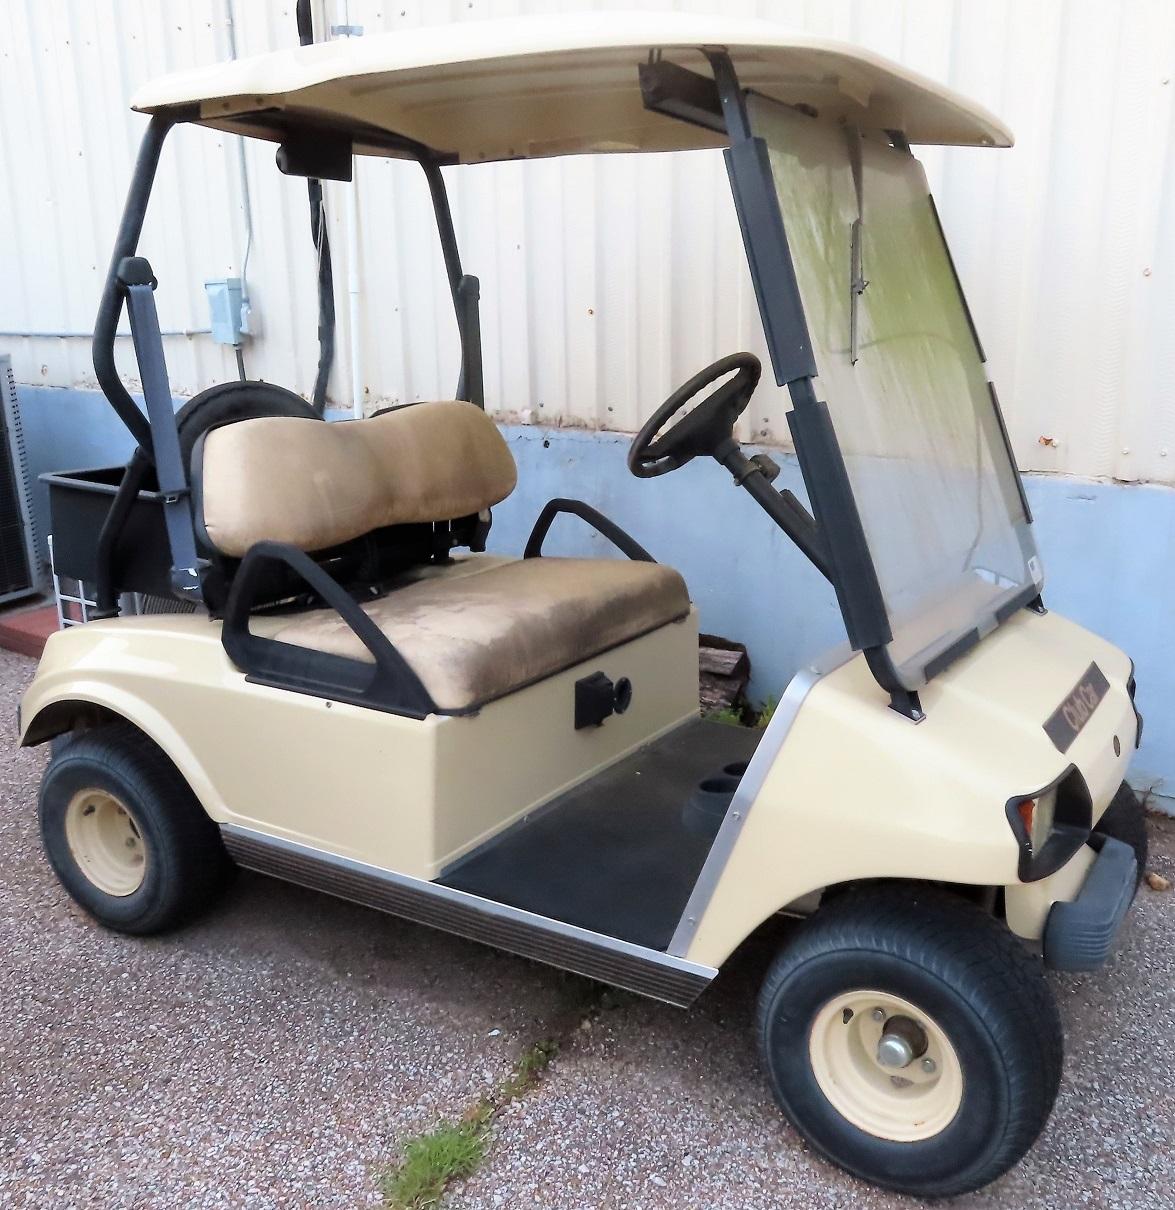 Club Car Electric Golf Cart, It Has Been Sitting For Five Years, Will Not Run, Needs Baterries.